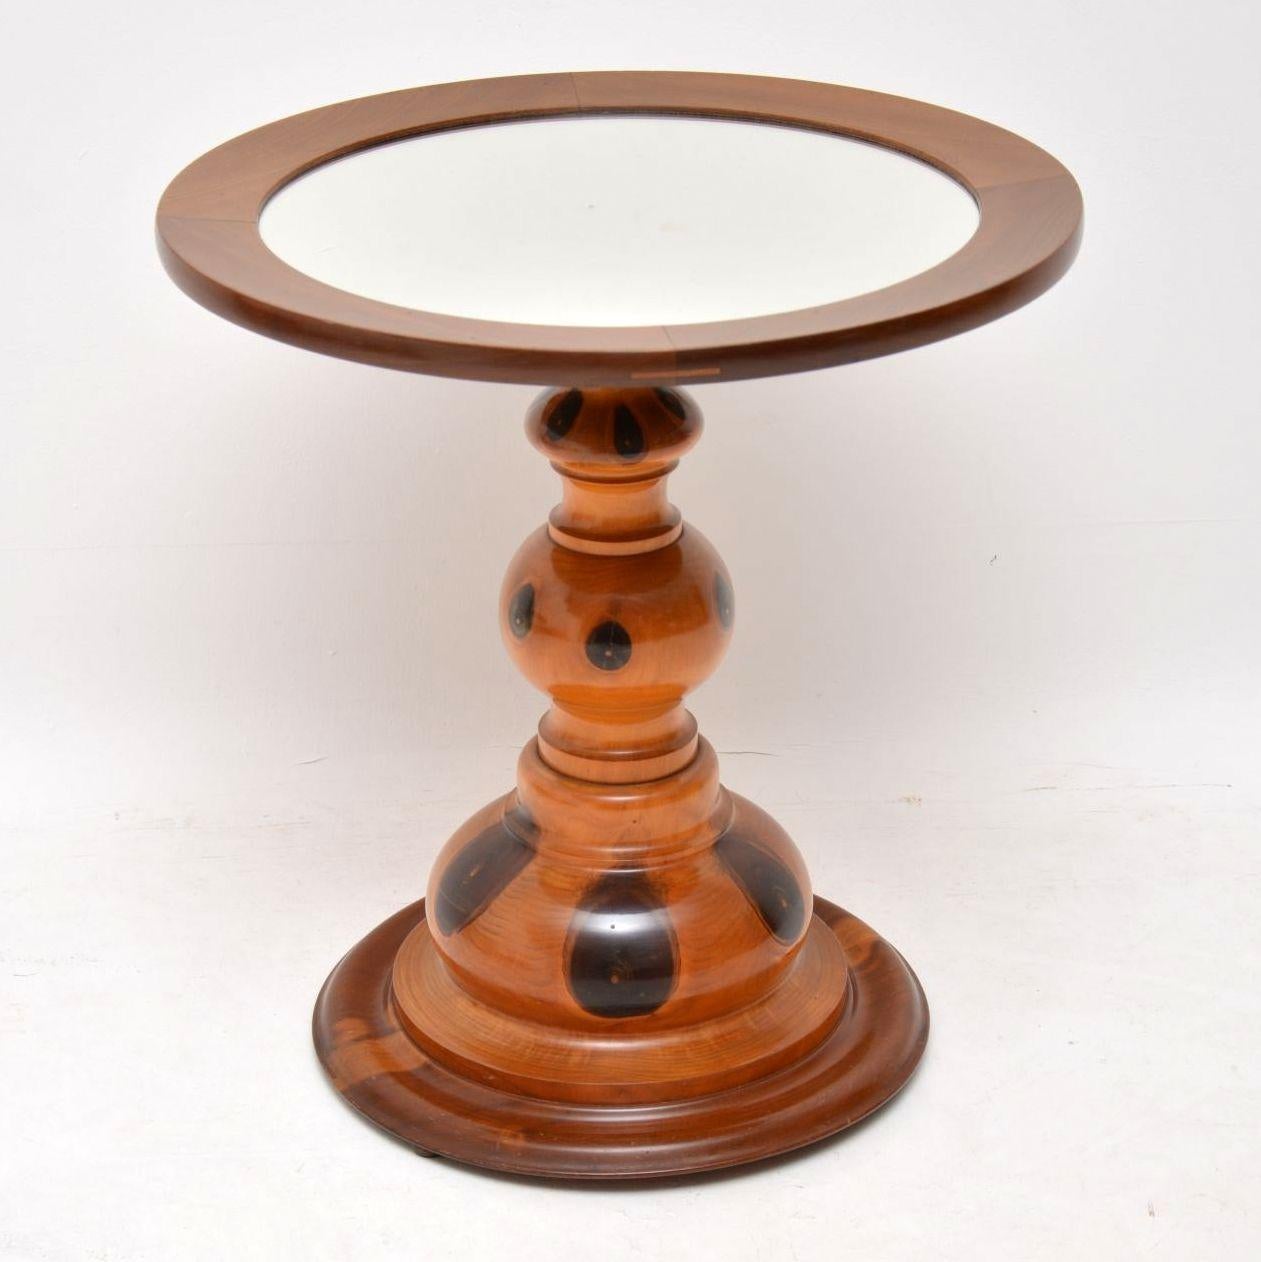 This antique occasional table is made from a very unusual wood, which I can’t quite figure out, but whatever it is, it has some very distinct figuring in it. This table has an inset mirror on the top and a bodily turned base column. I think it could